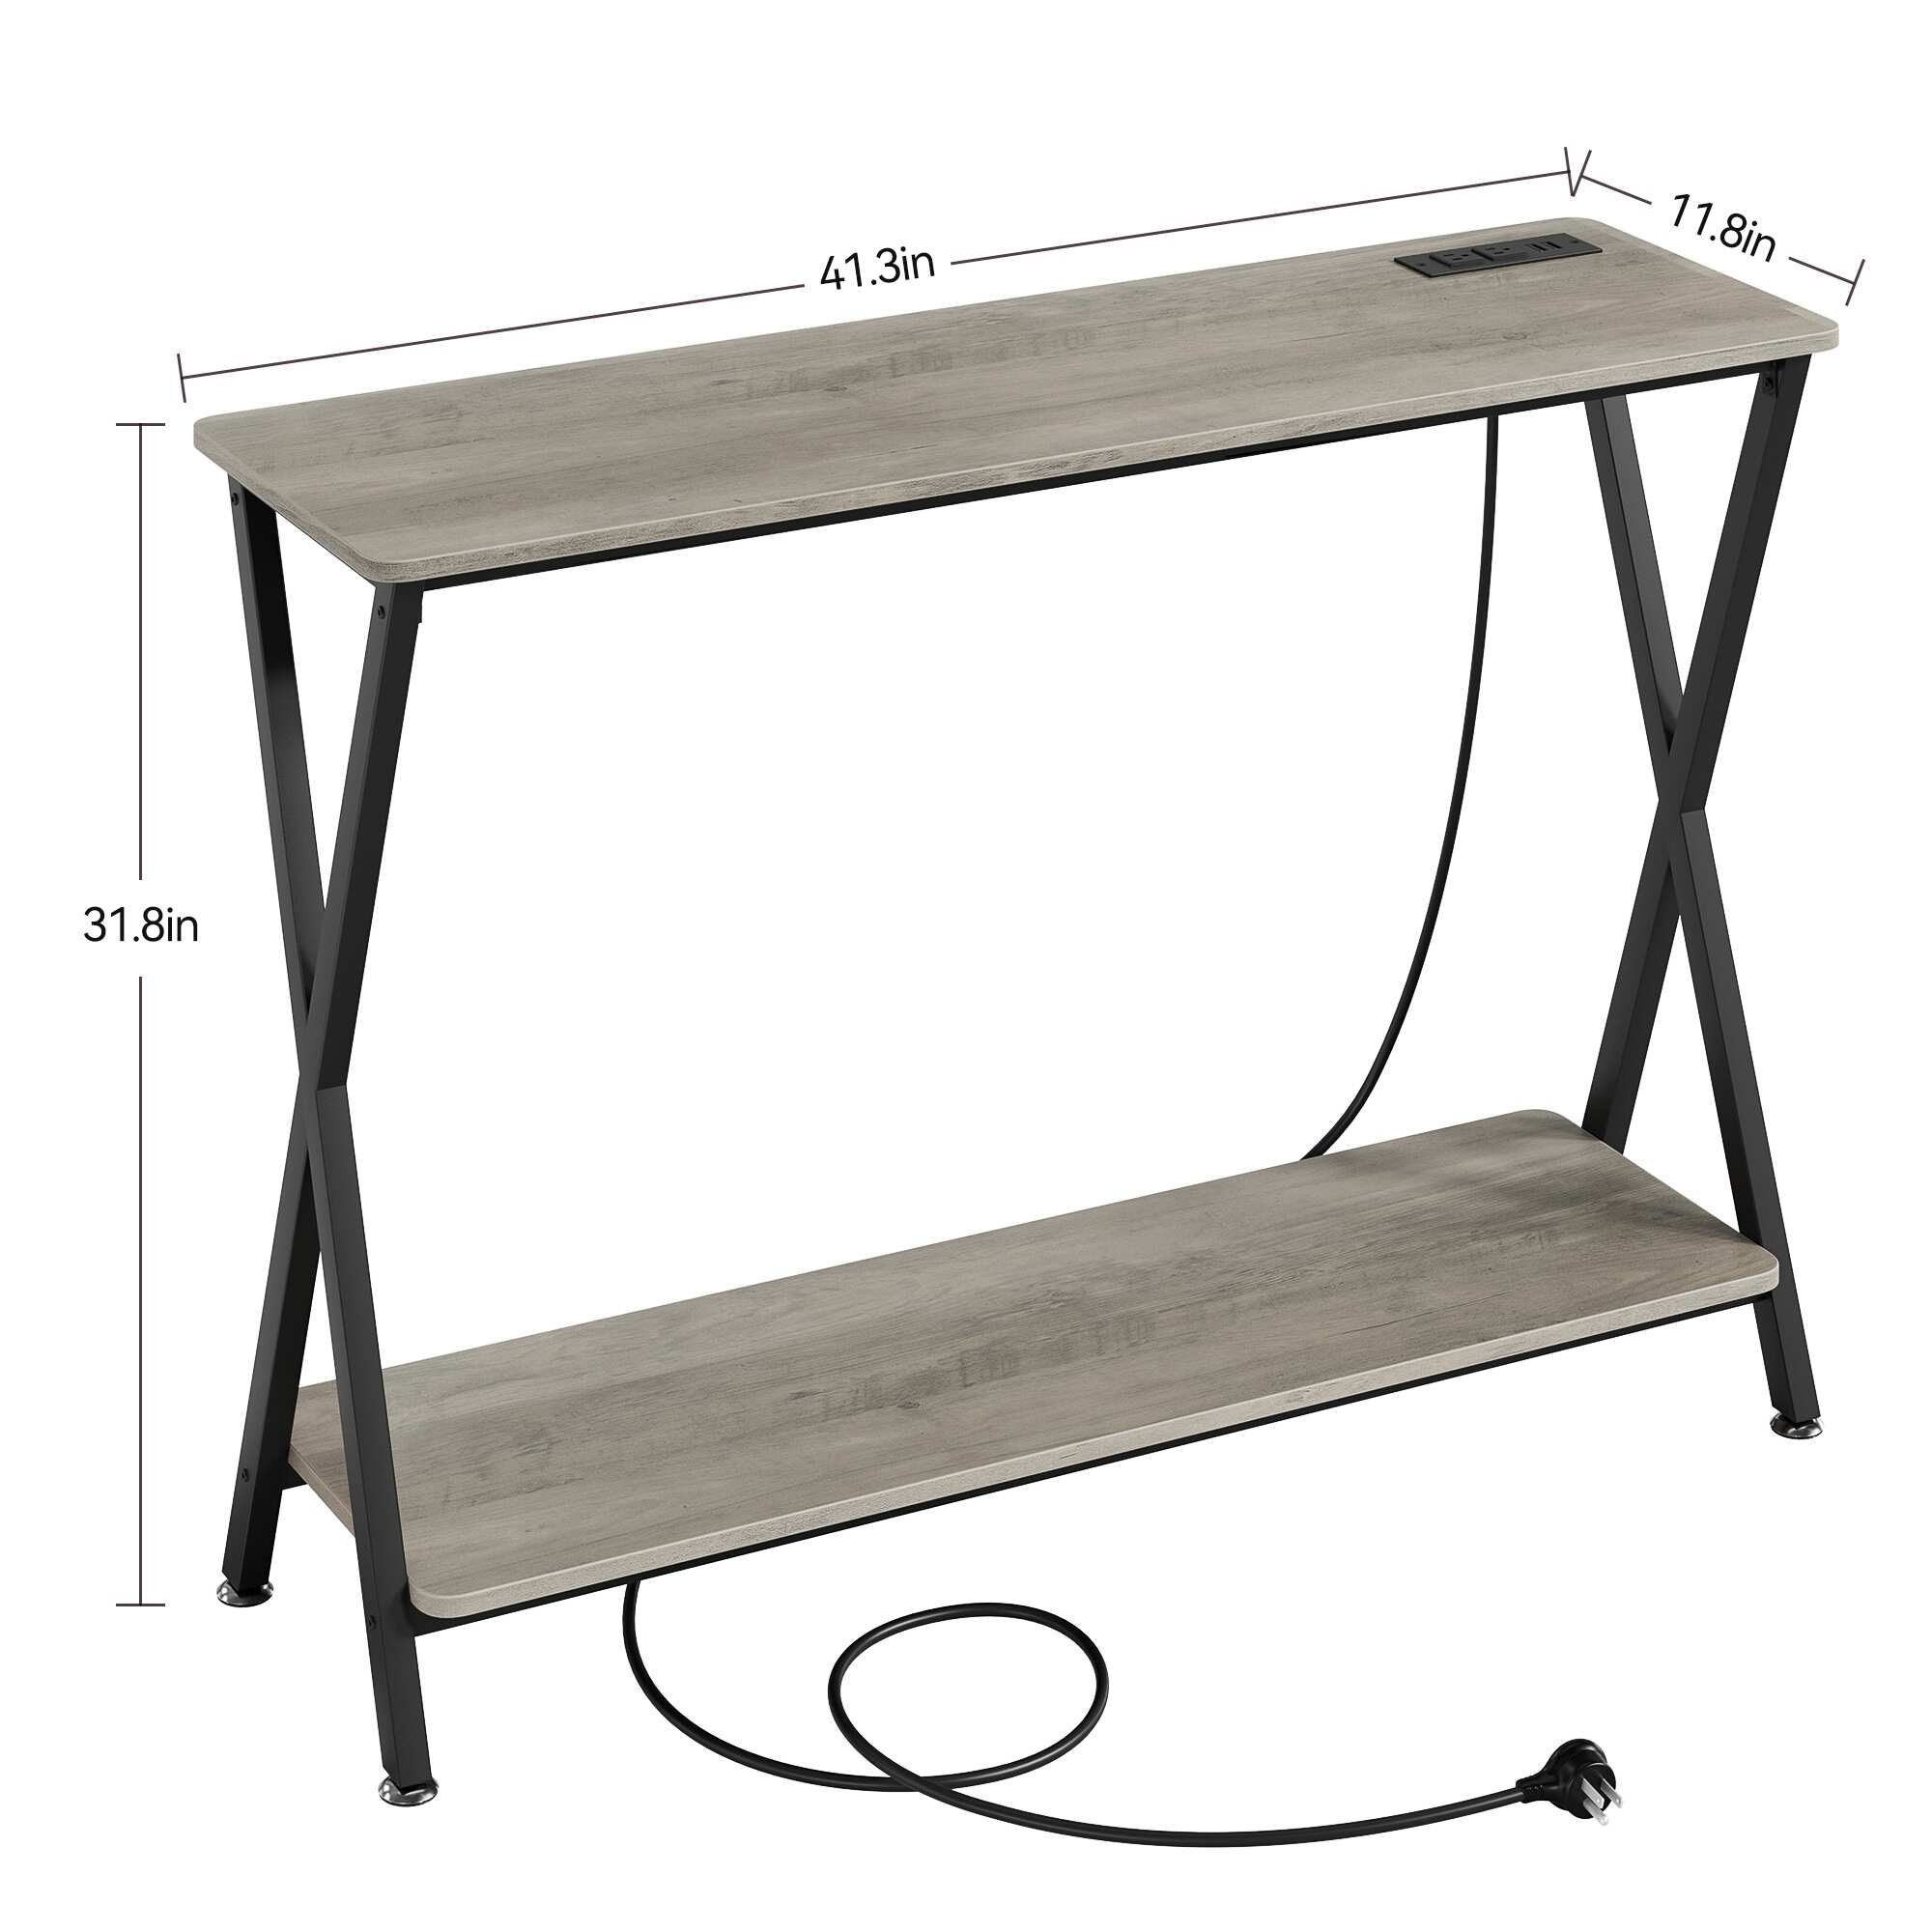 41.3" Farmhouse Console Table with Outlet Shelf and Metal Frame - 11.8"D x 41.3"W x 31.8"H